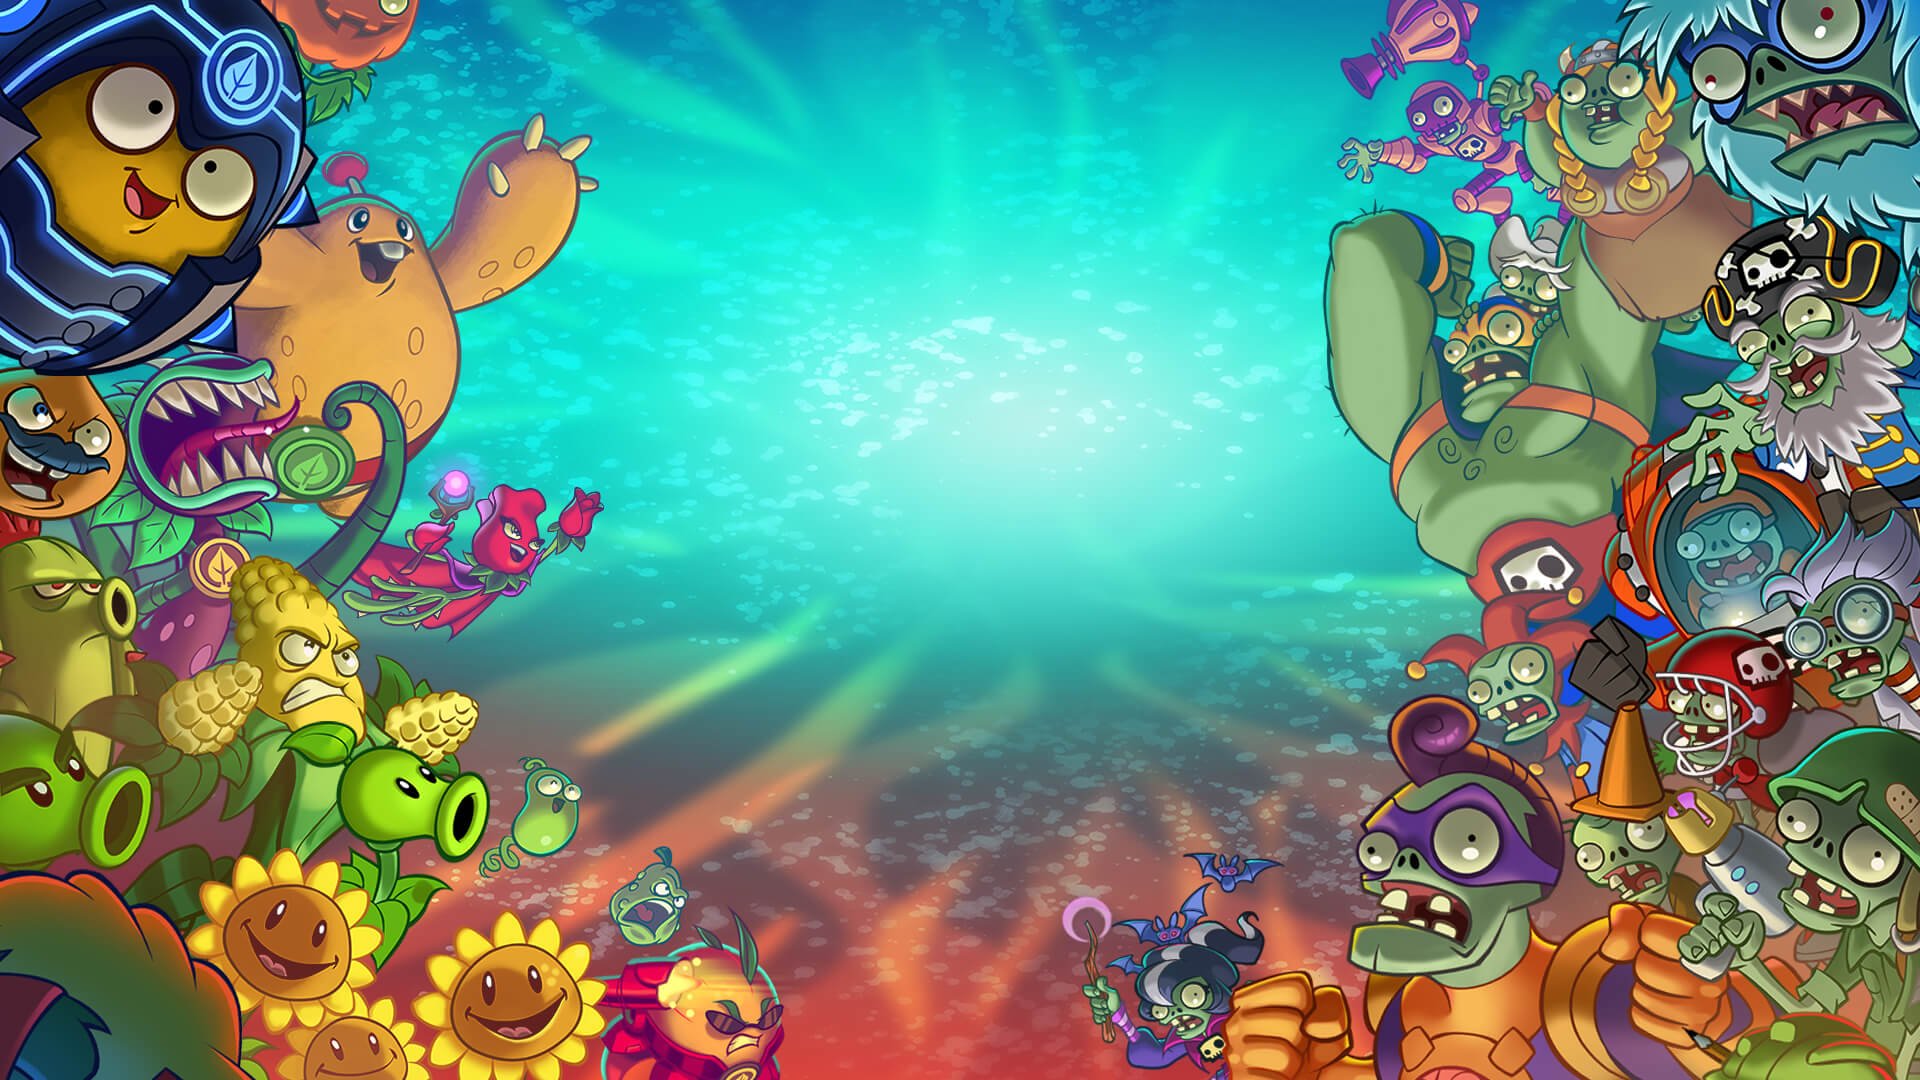 Plants vs. Zombies Heroes is the Hearthstone mashup I didn't know I